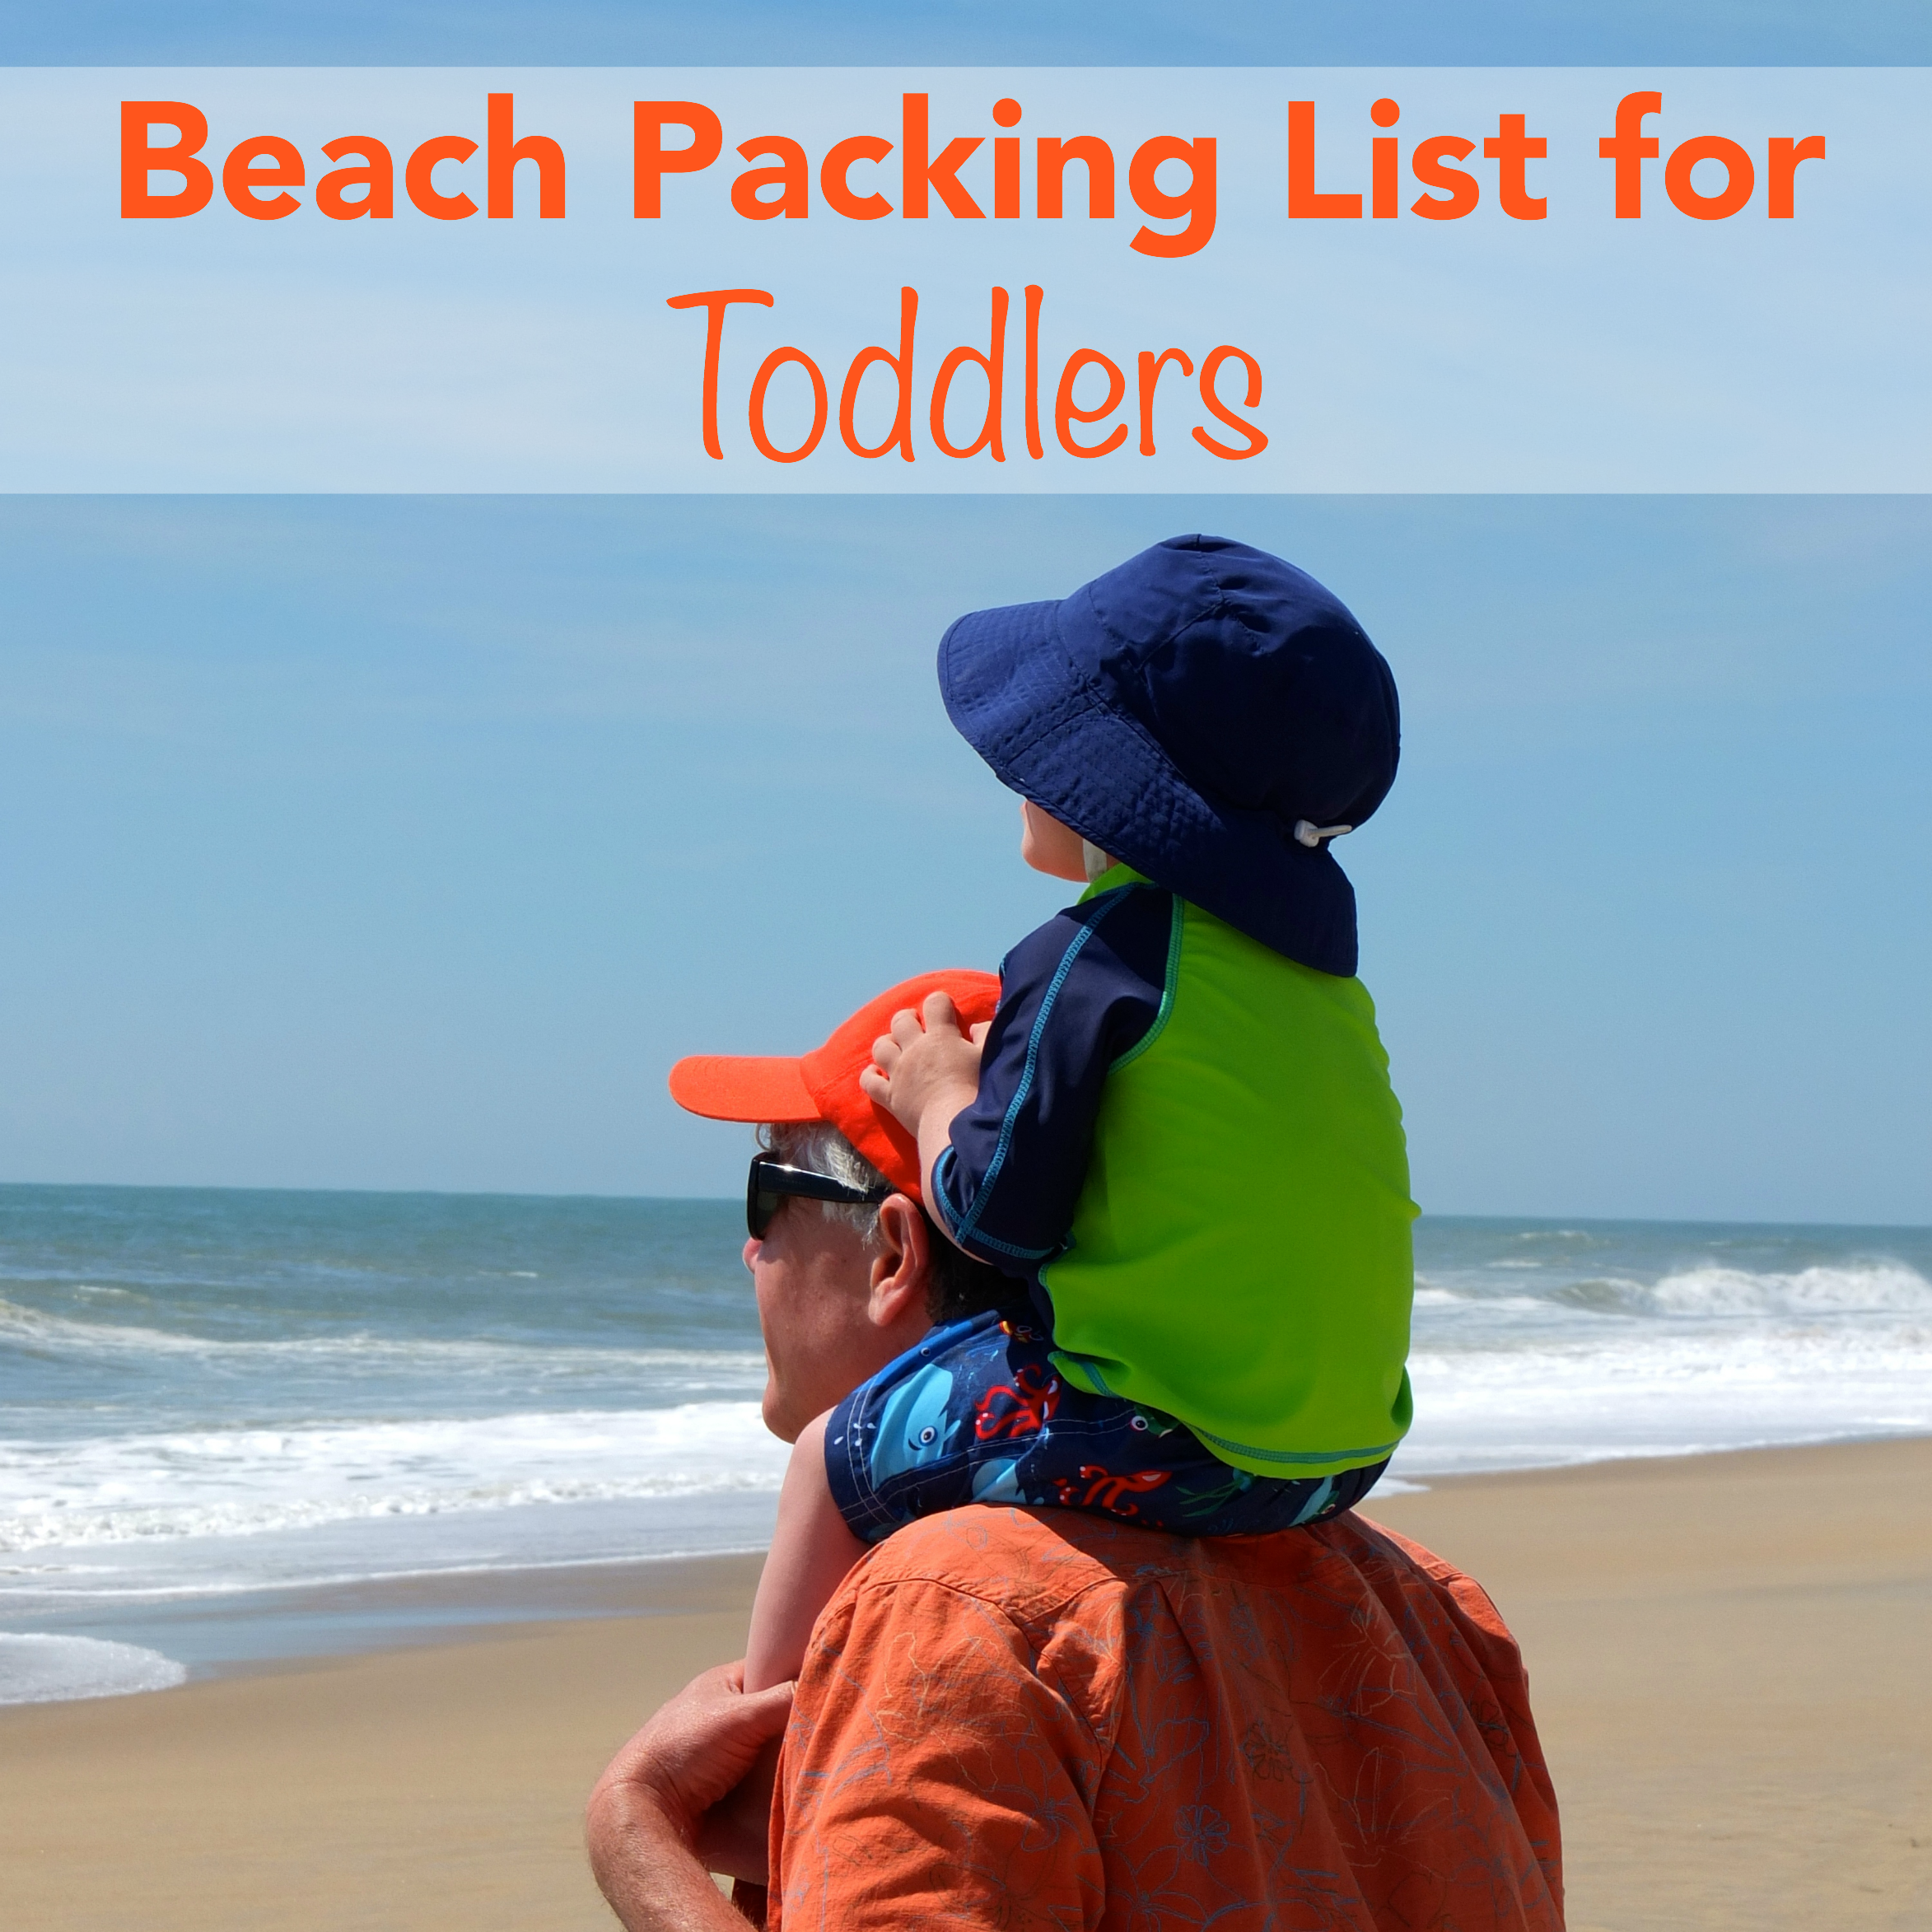 Beach Packing List for Toddlers